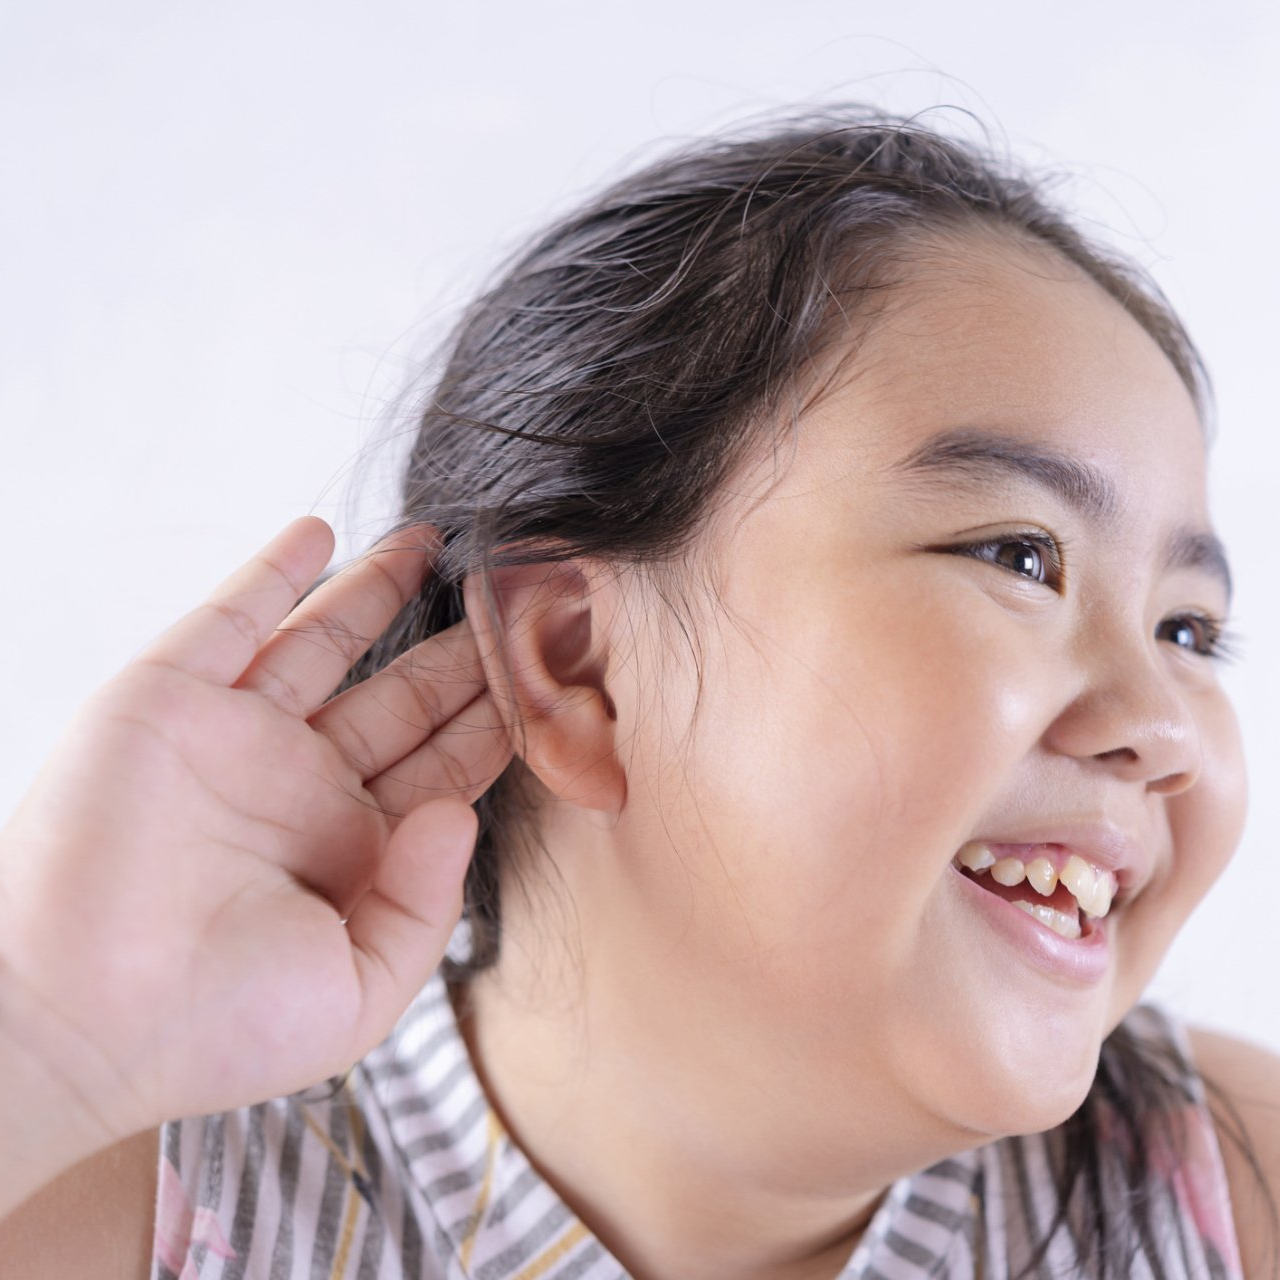 Hearing test result  — Colorado Springs, CO — NorthStar Audiology